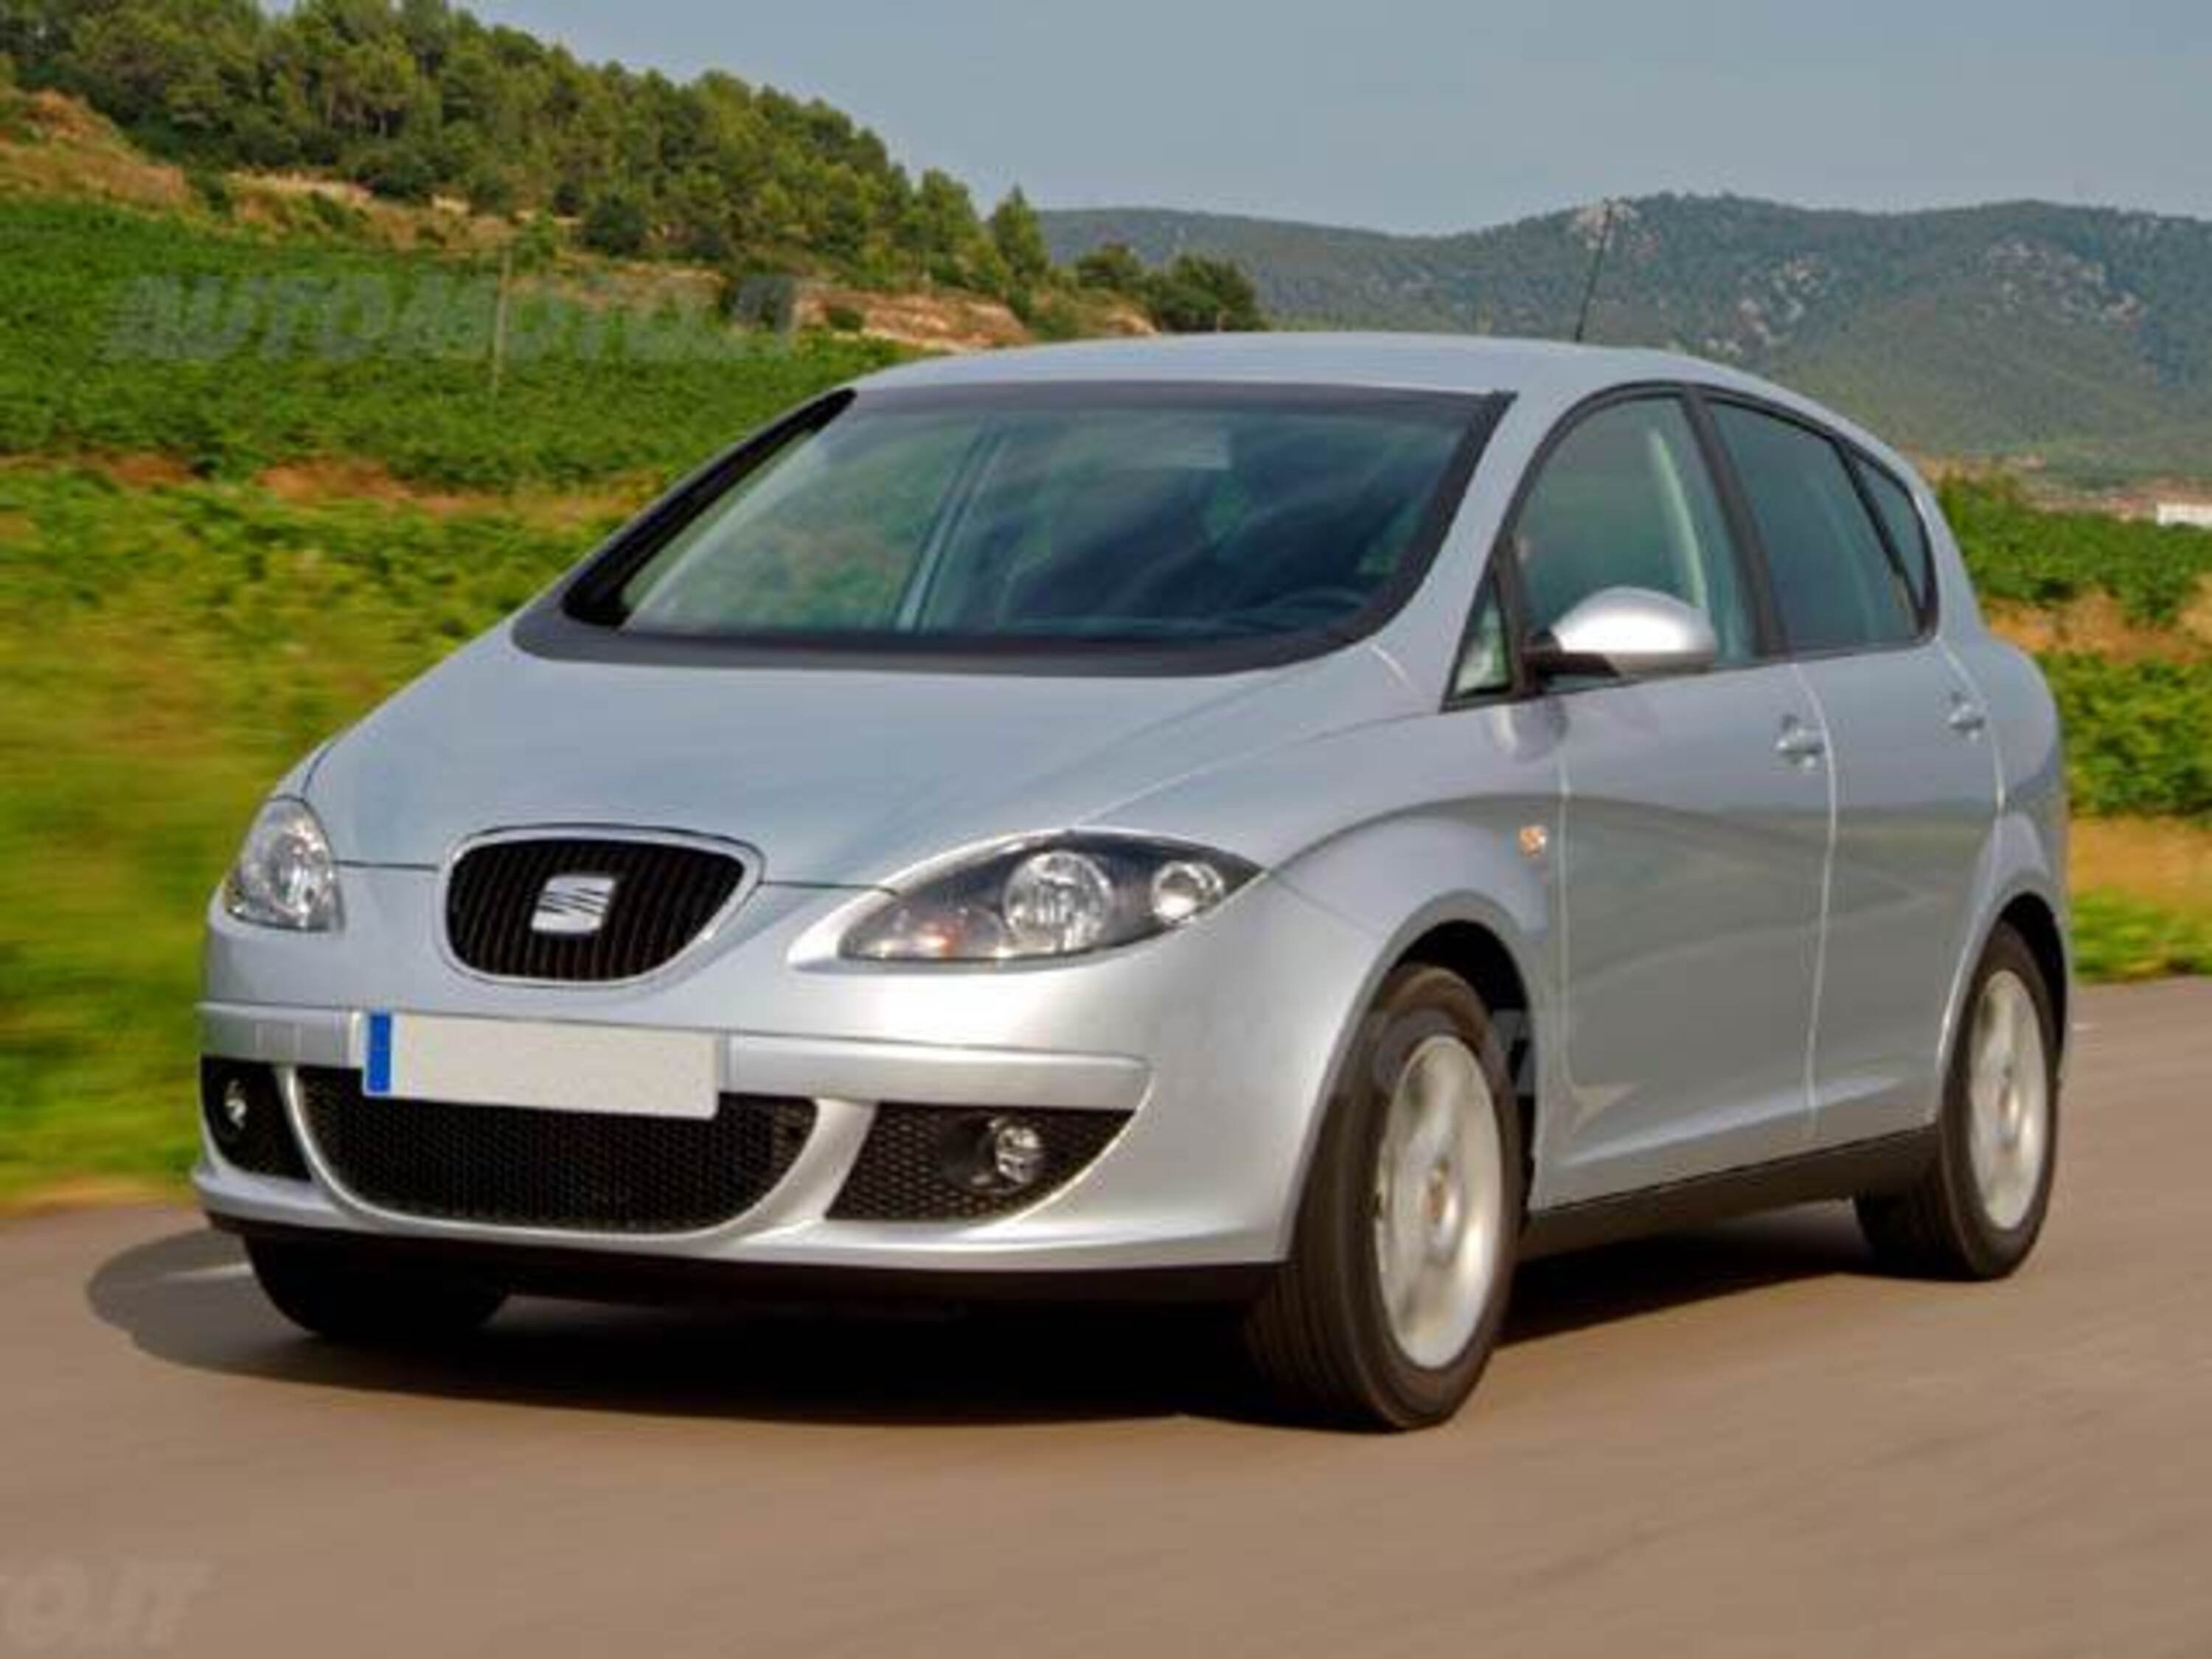 SEAT Toledo 1.6 Reference Dual 